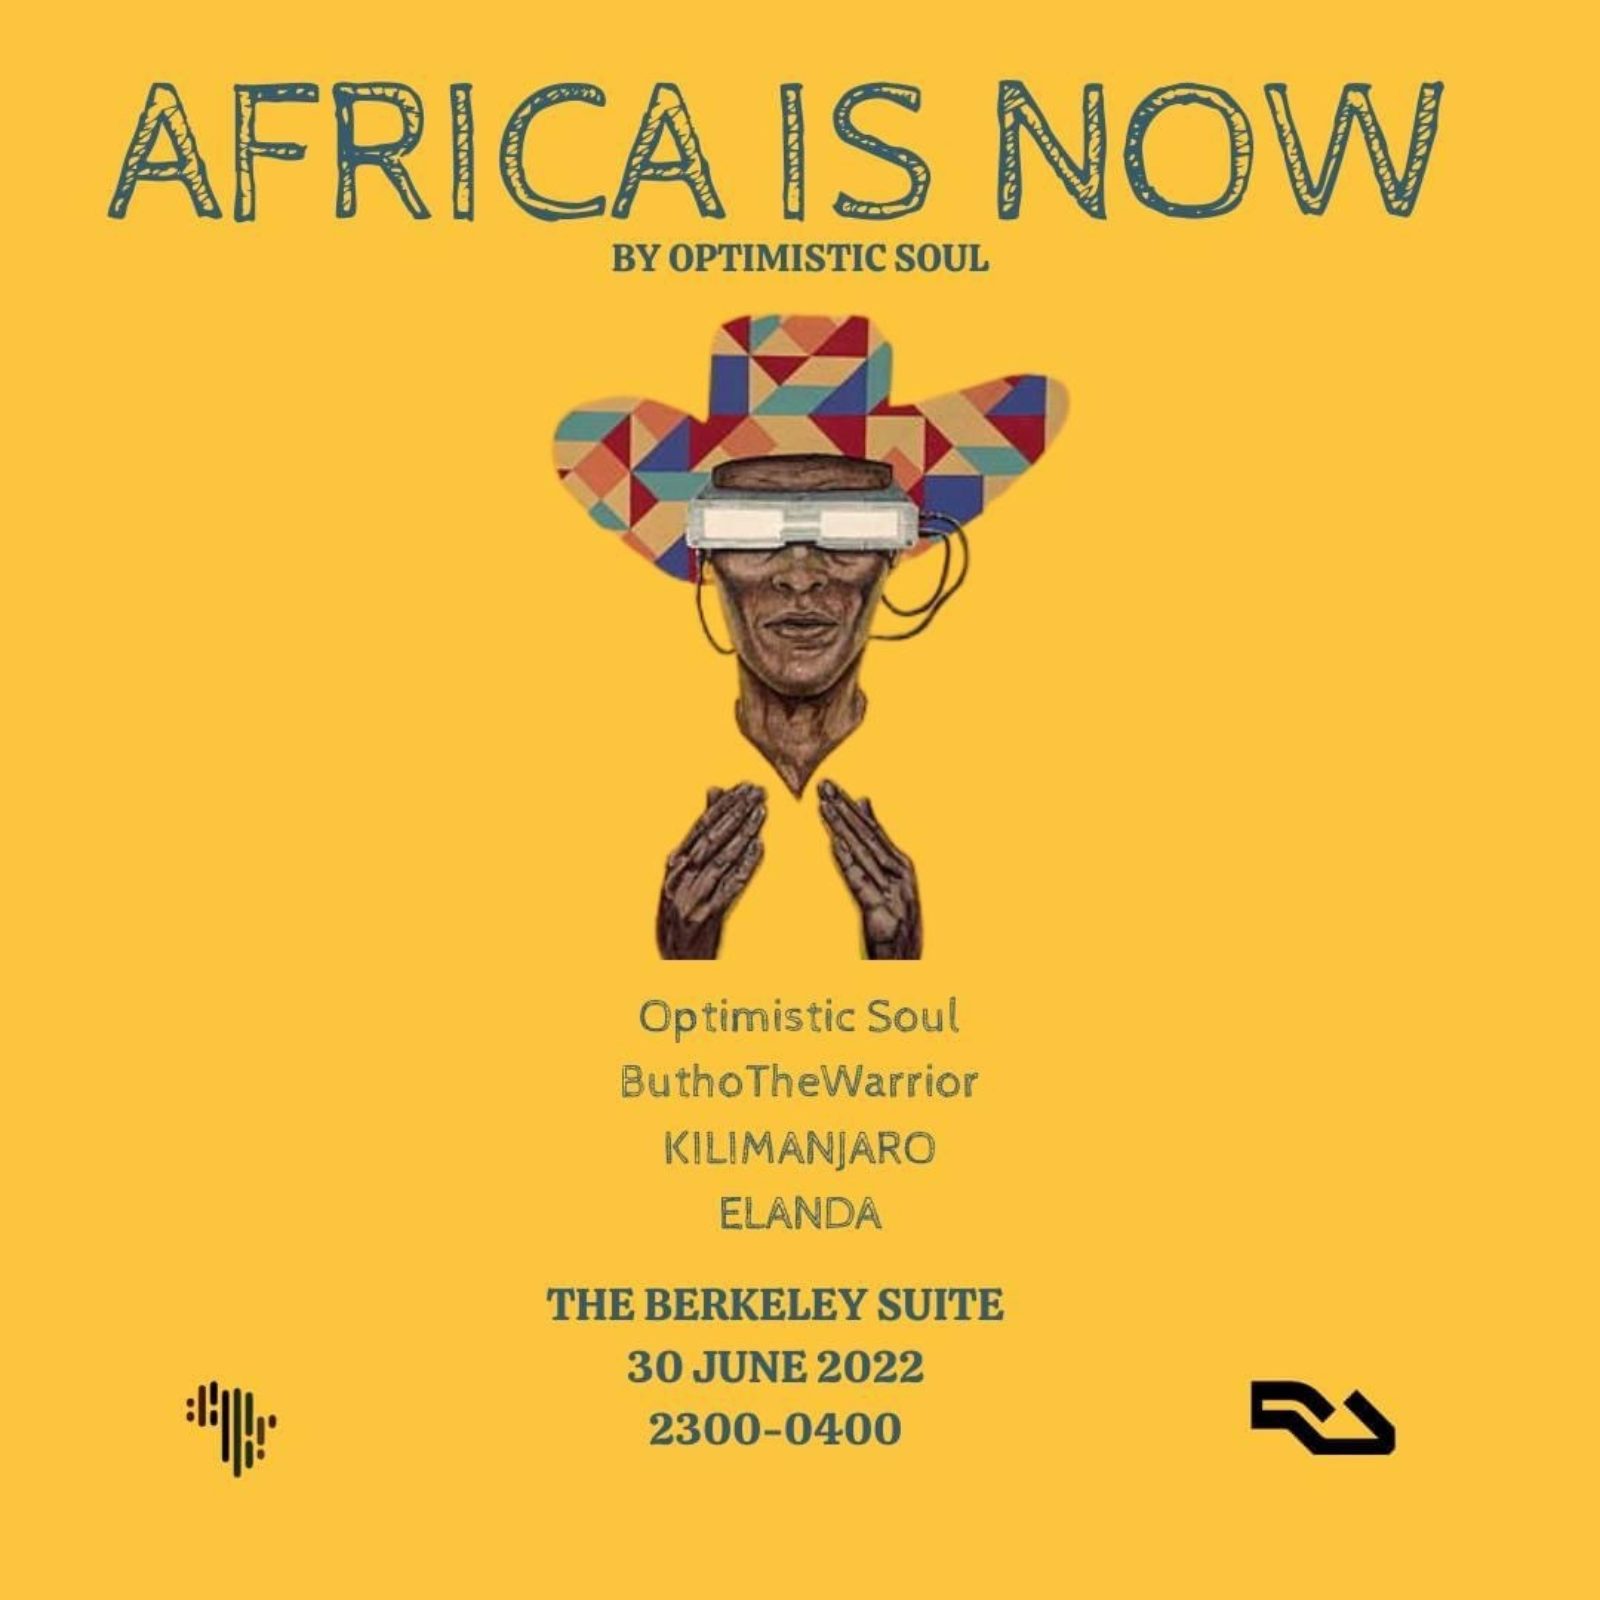 AFRICA IS NOW